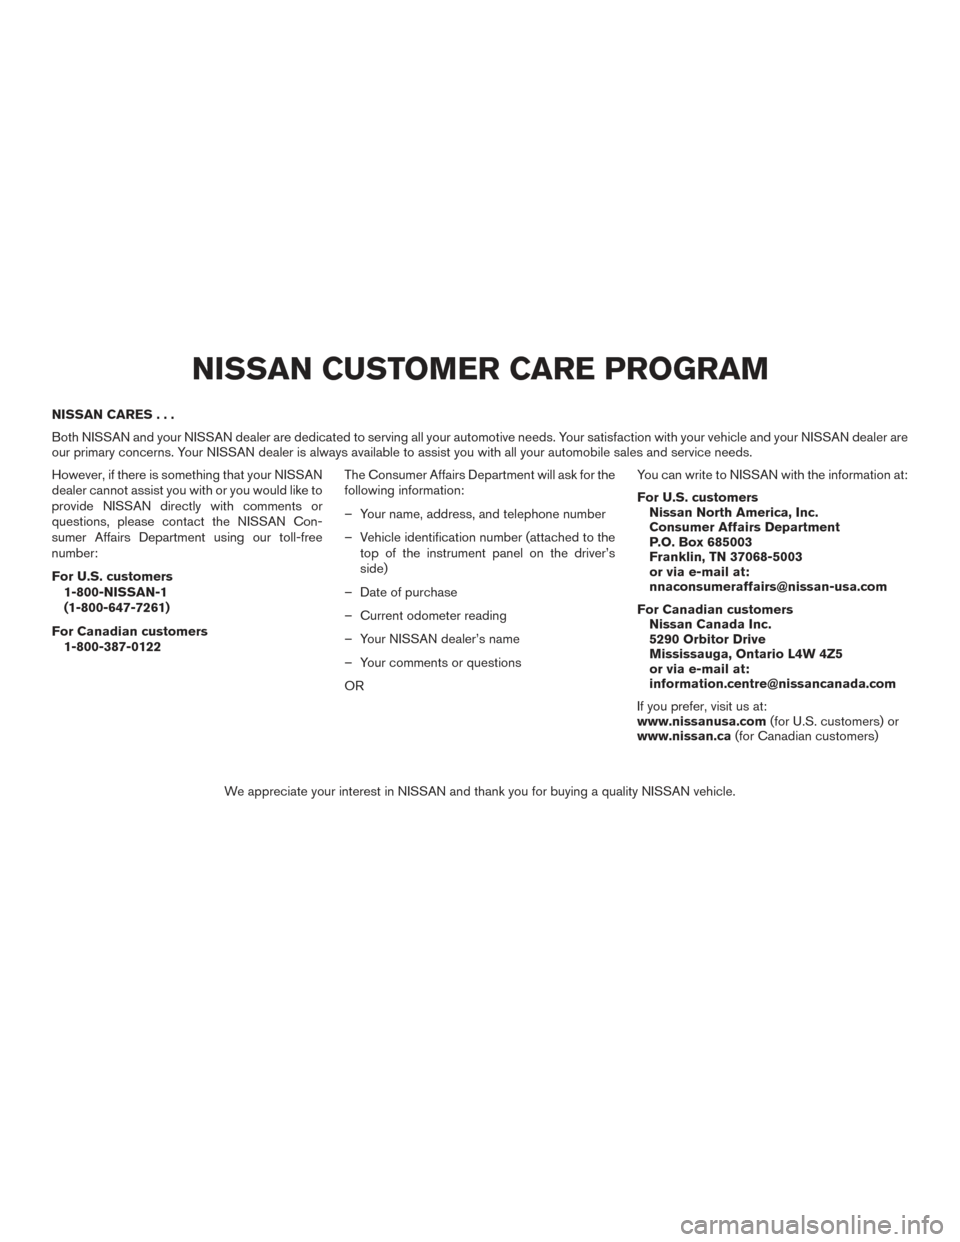 NISSAN MAXIMA 2017 A36 / 8.G Owners Manual NISSAN CARES...
Both NISSAN and your NISSAN dealer are dedicated to serving all your automotive needs. Your satisfaction with your vehicle and your NISSAN dealer are
our primary concerns. Your NISSAN 